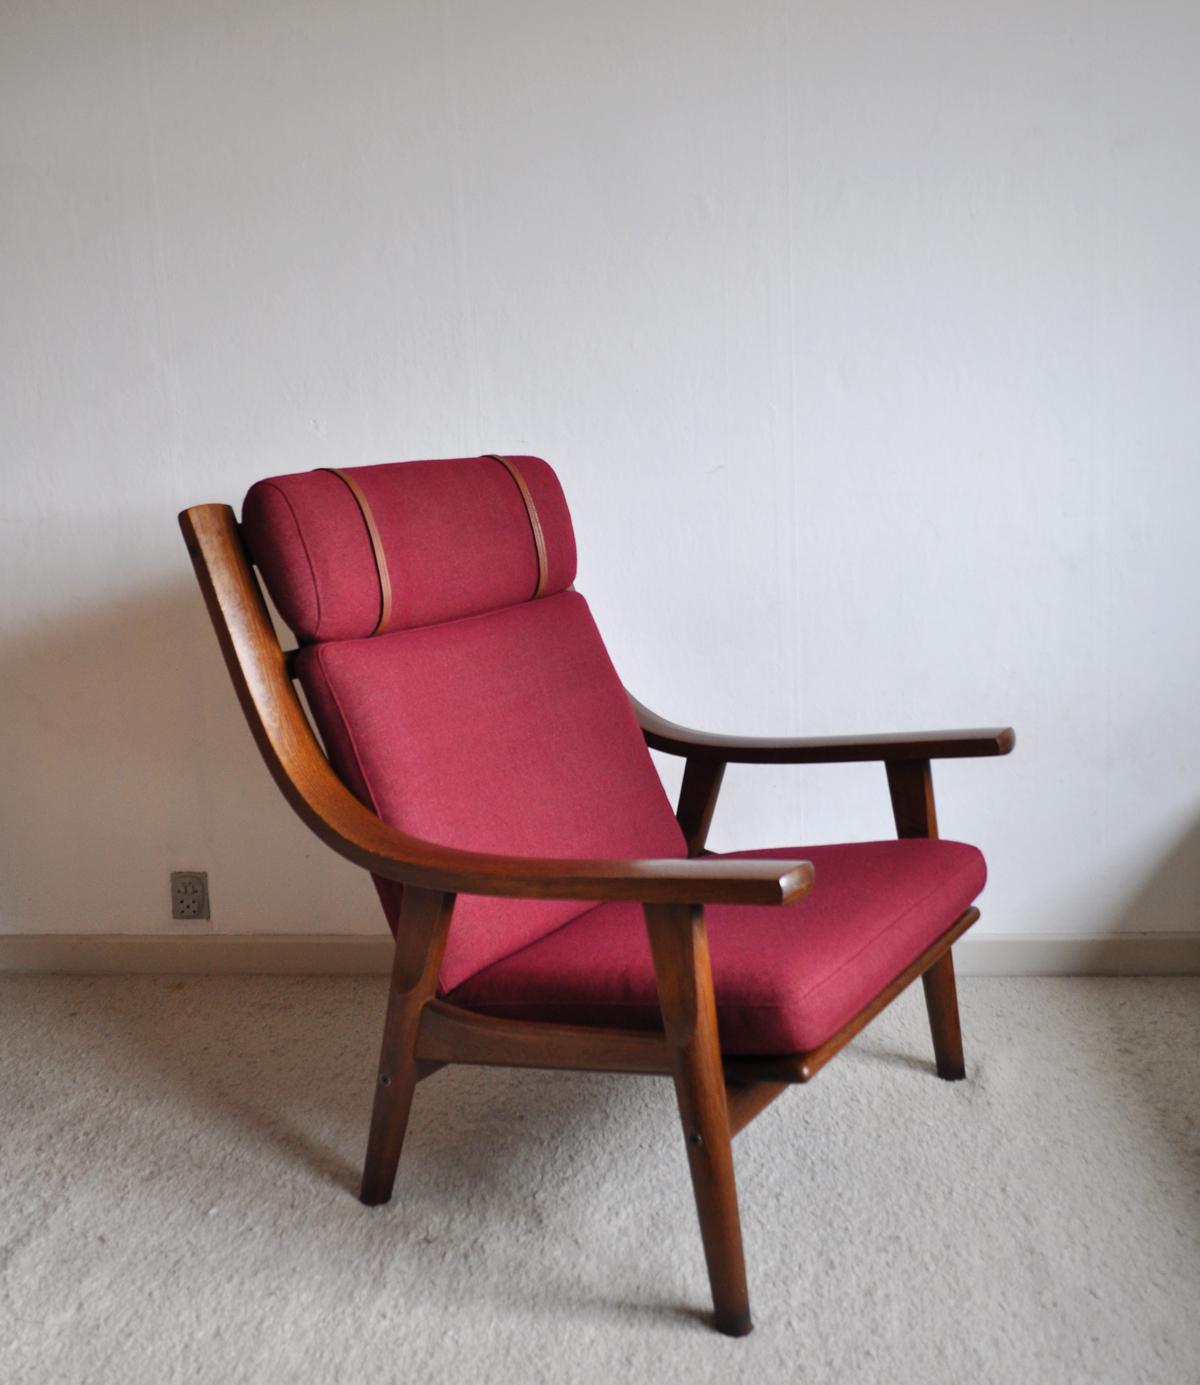 Hans J. Wegner GE 530

Comfortable large high-back lounge chair made of stained oak, designed in 1970 by Hans J. Wegner. Manufactured by GETAMA.
New leather straps.
Signs of wear consistent with age and use.

Measures:
93 H x 78 W x 88 D cm
Seat